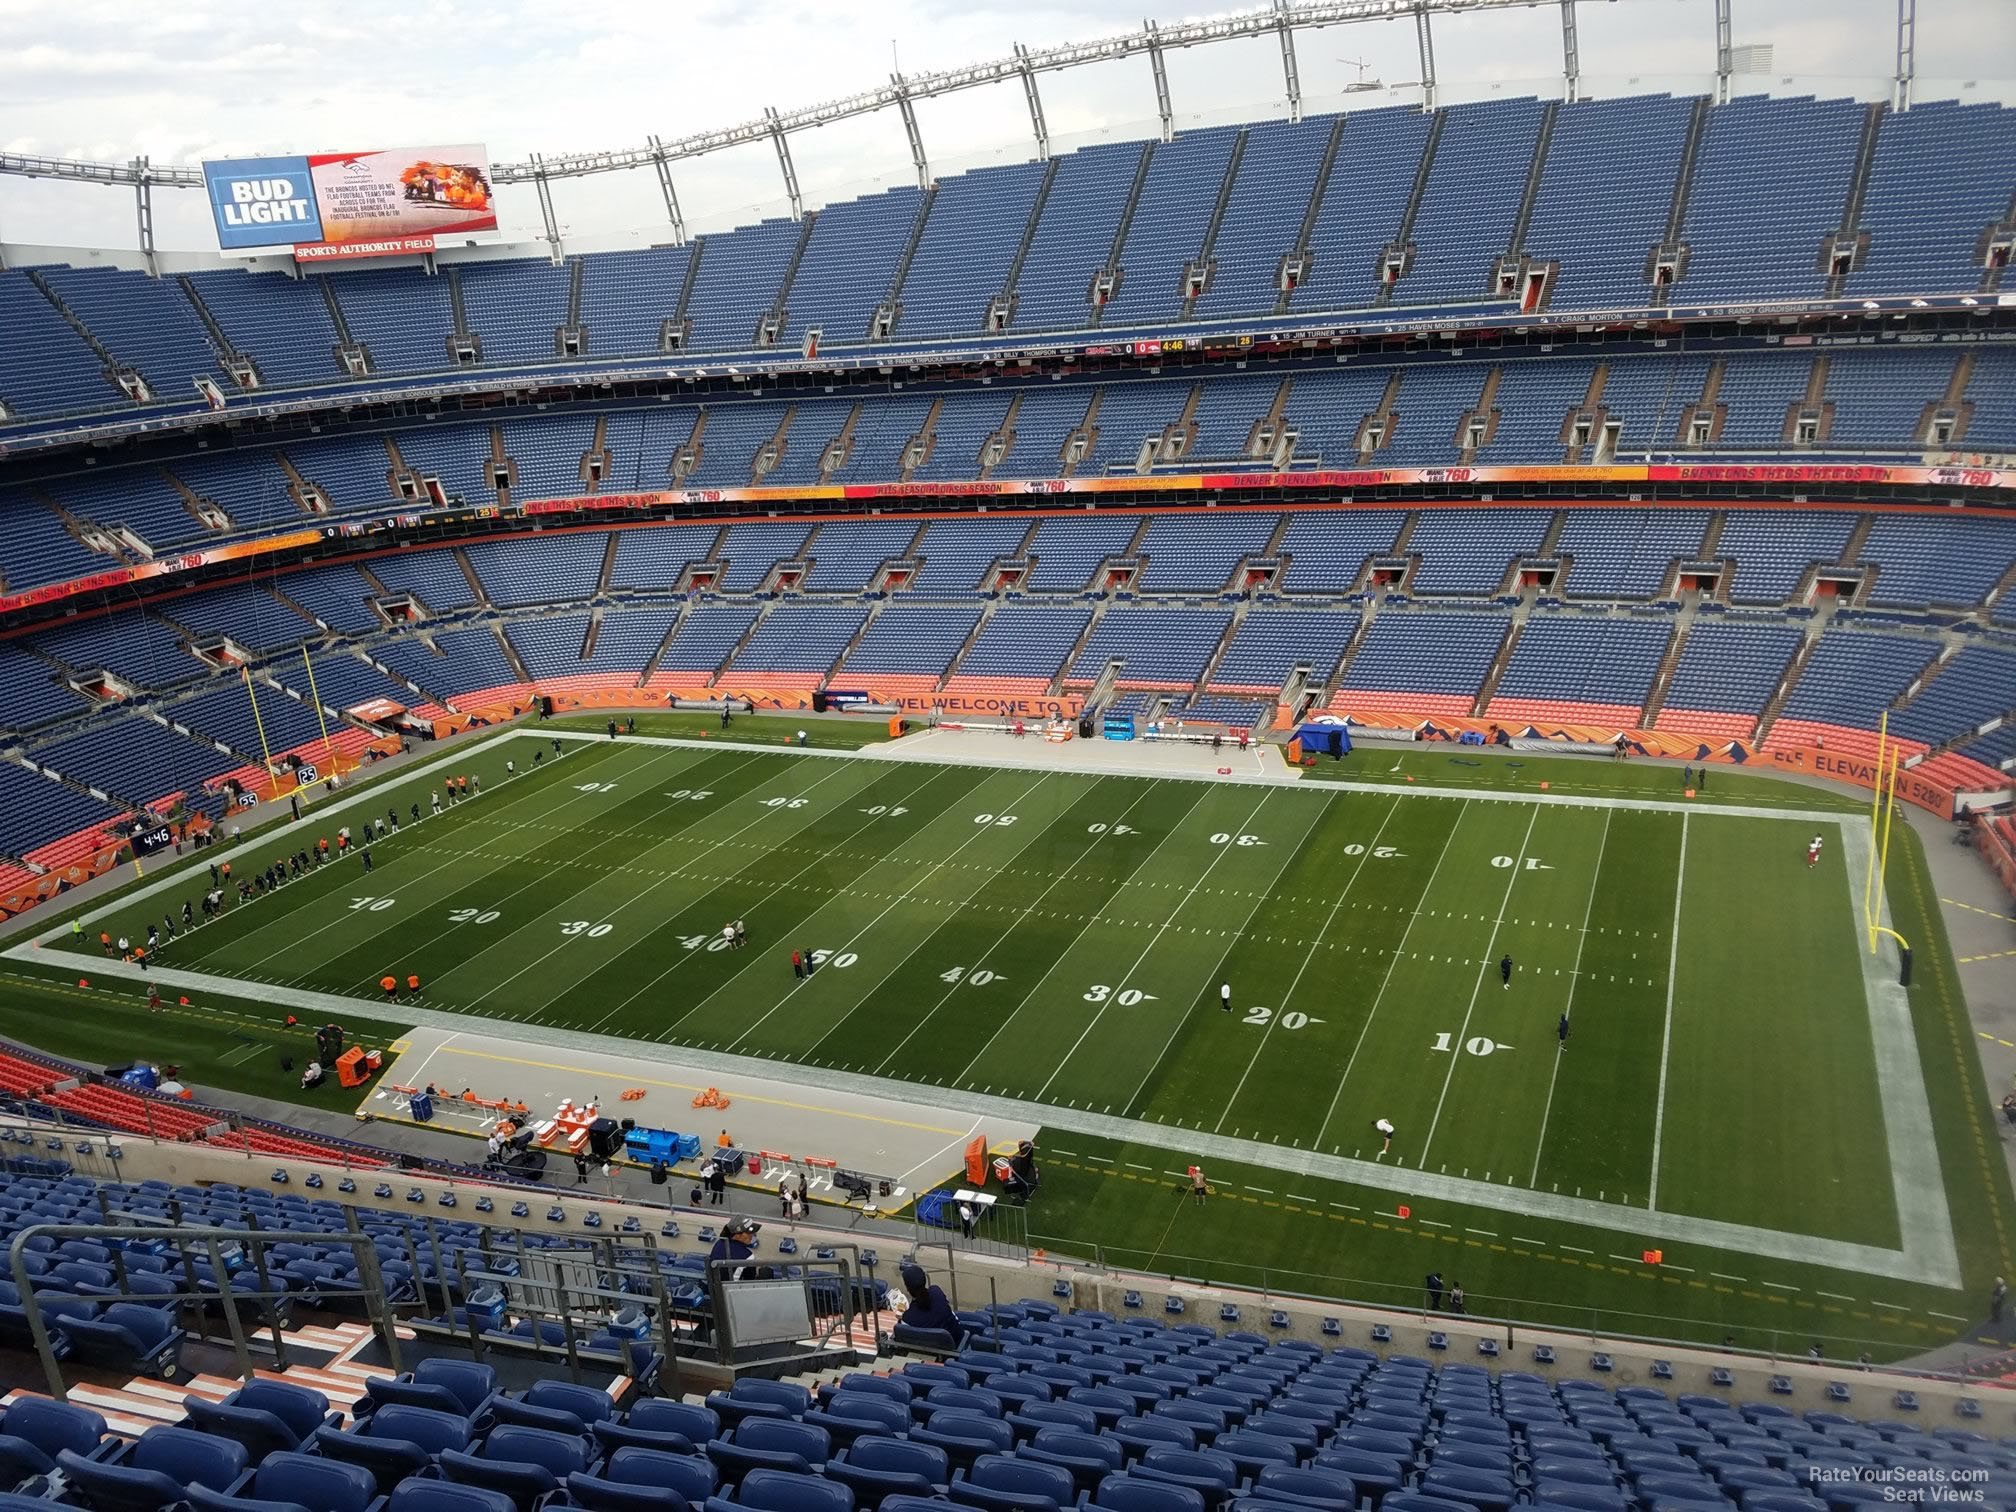 section 504, row 16 seat view  - empower field (at mile high)